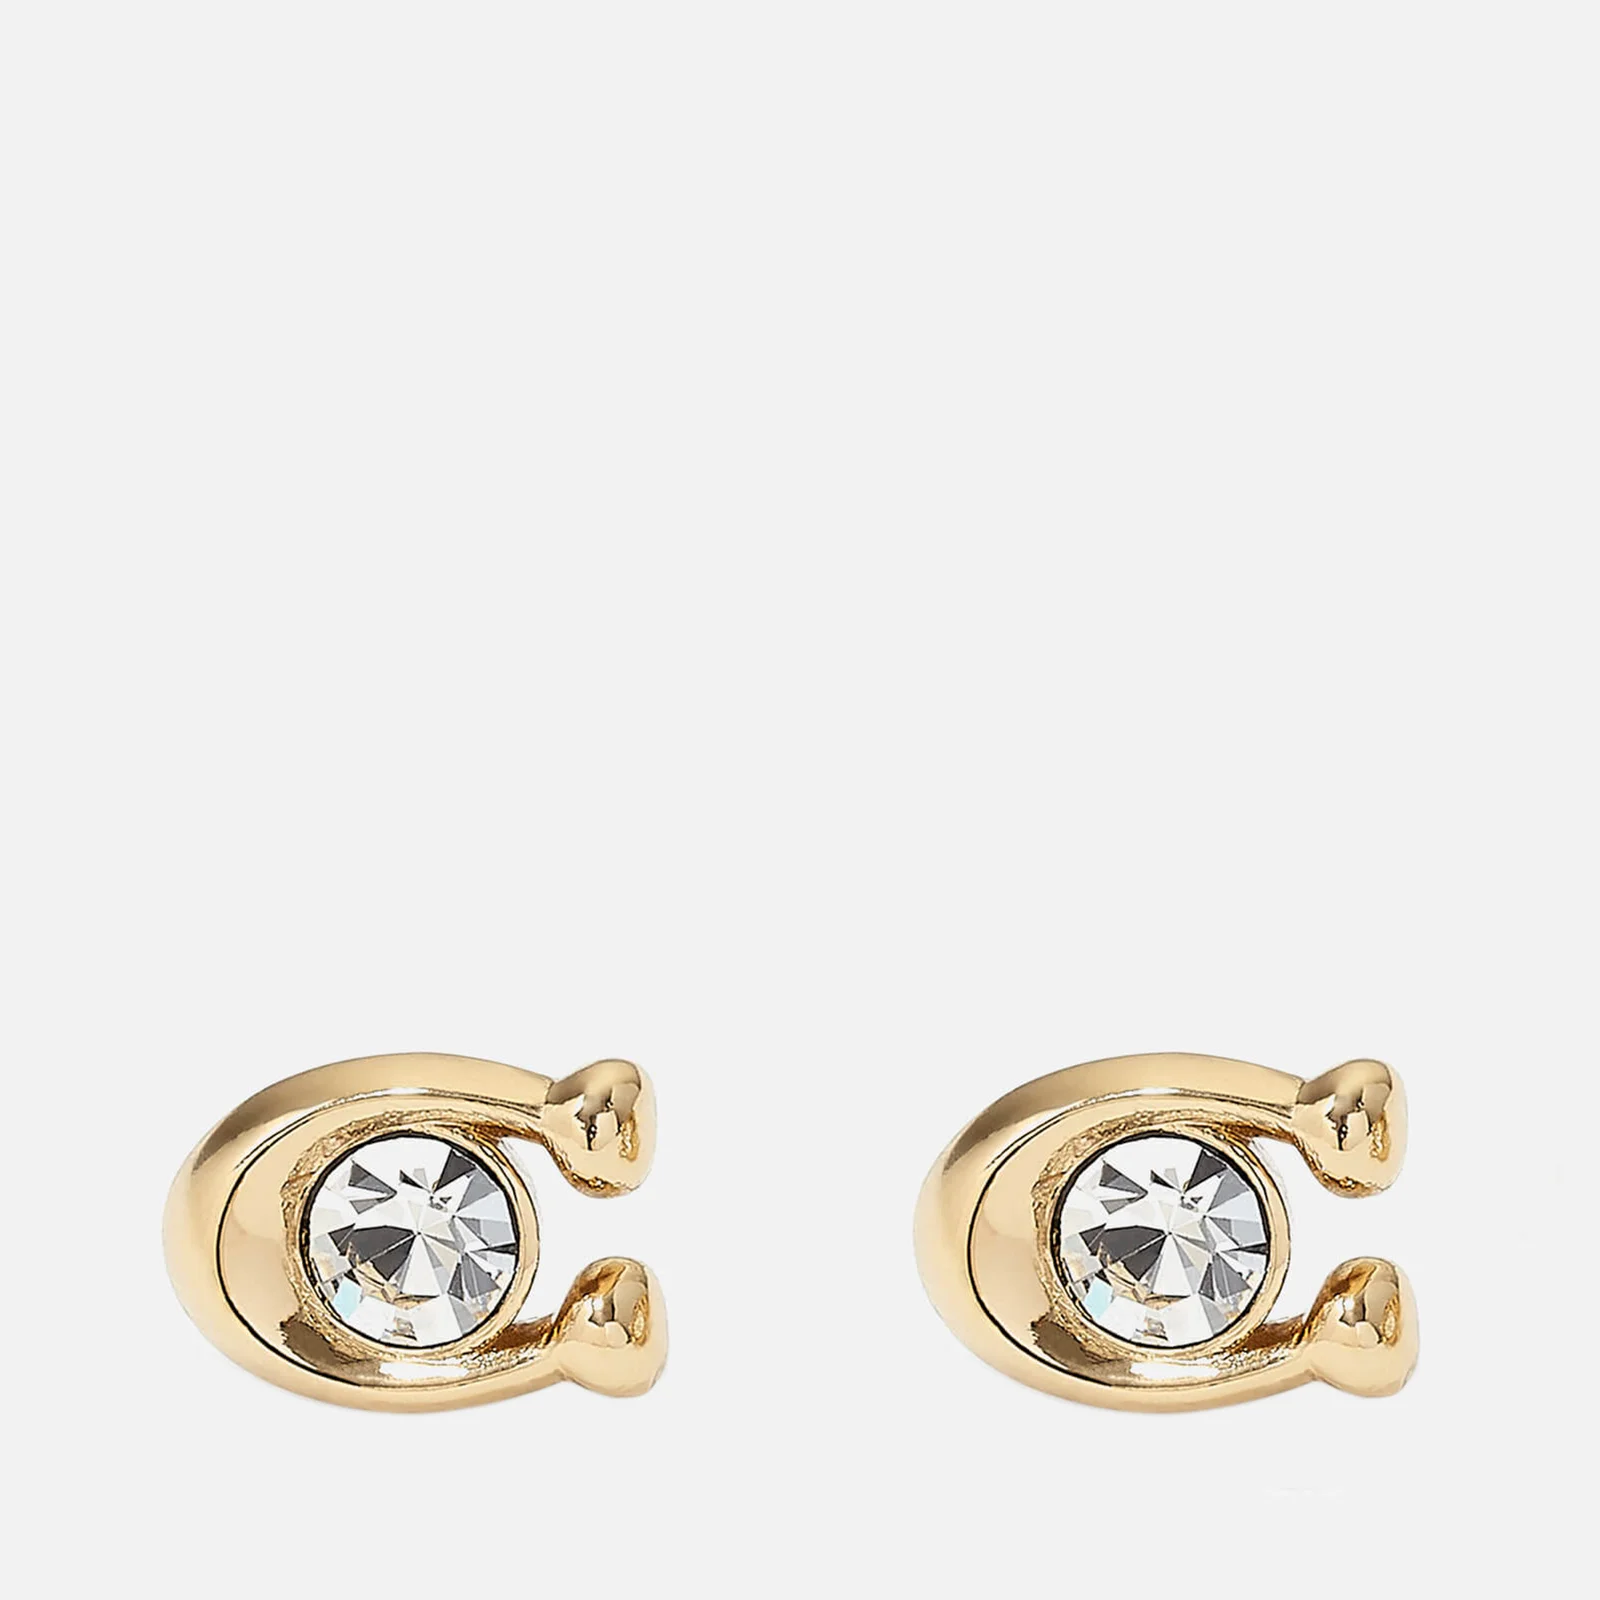 Coach Signature Stone Gold-Tone and Crystal Earrings Image 1